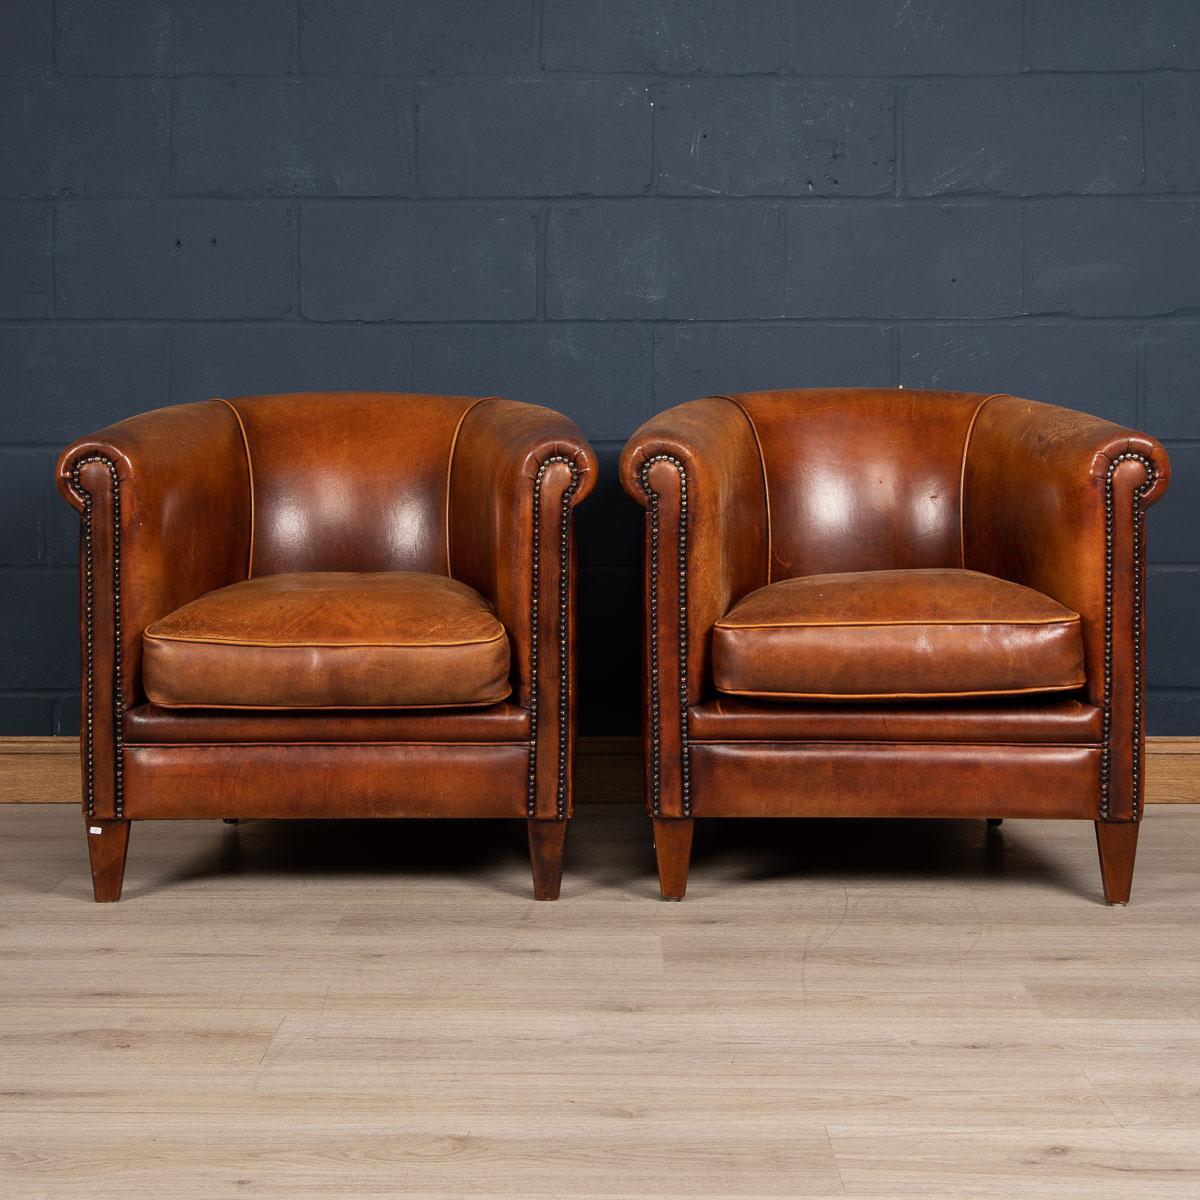 Showing superb patina and color, this wonderful pair of club chairs were hand upholstered sheepskin leather in Holland by the finest craftsmen. Fantastic look for any interior, both modern and traditional.

Please note that our interior pieces are